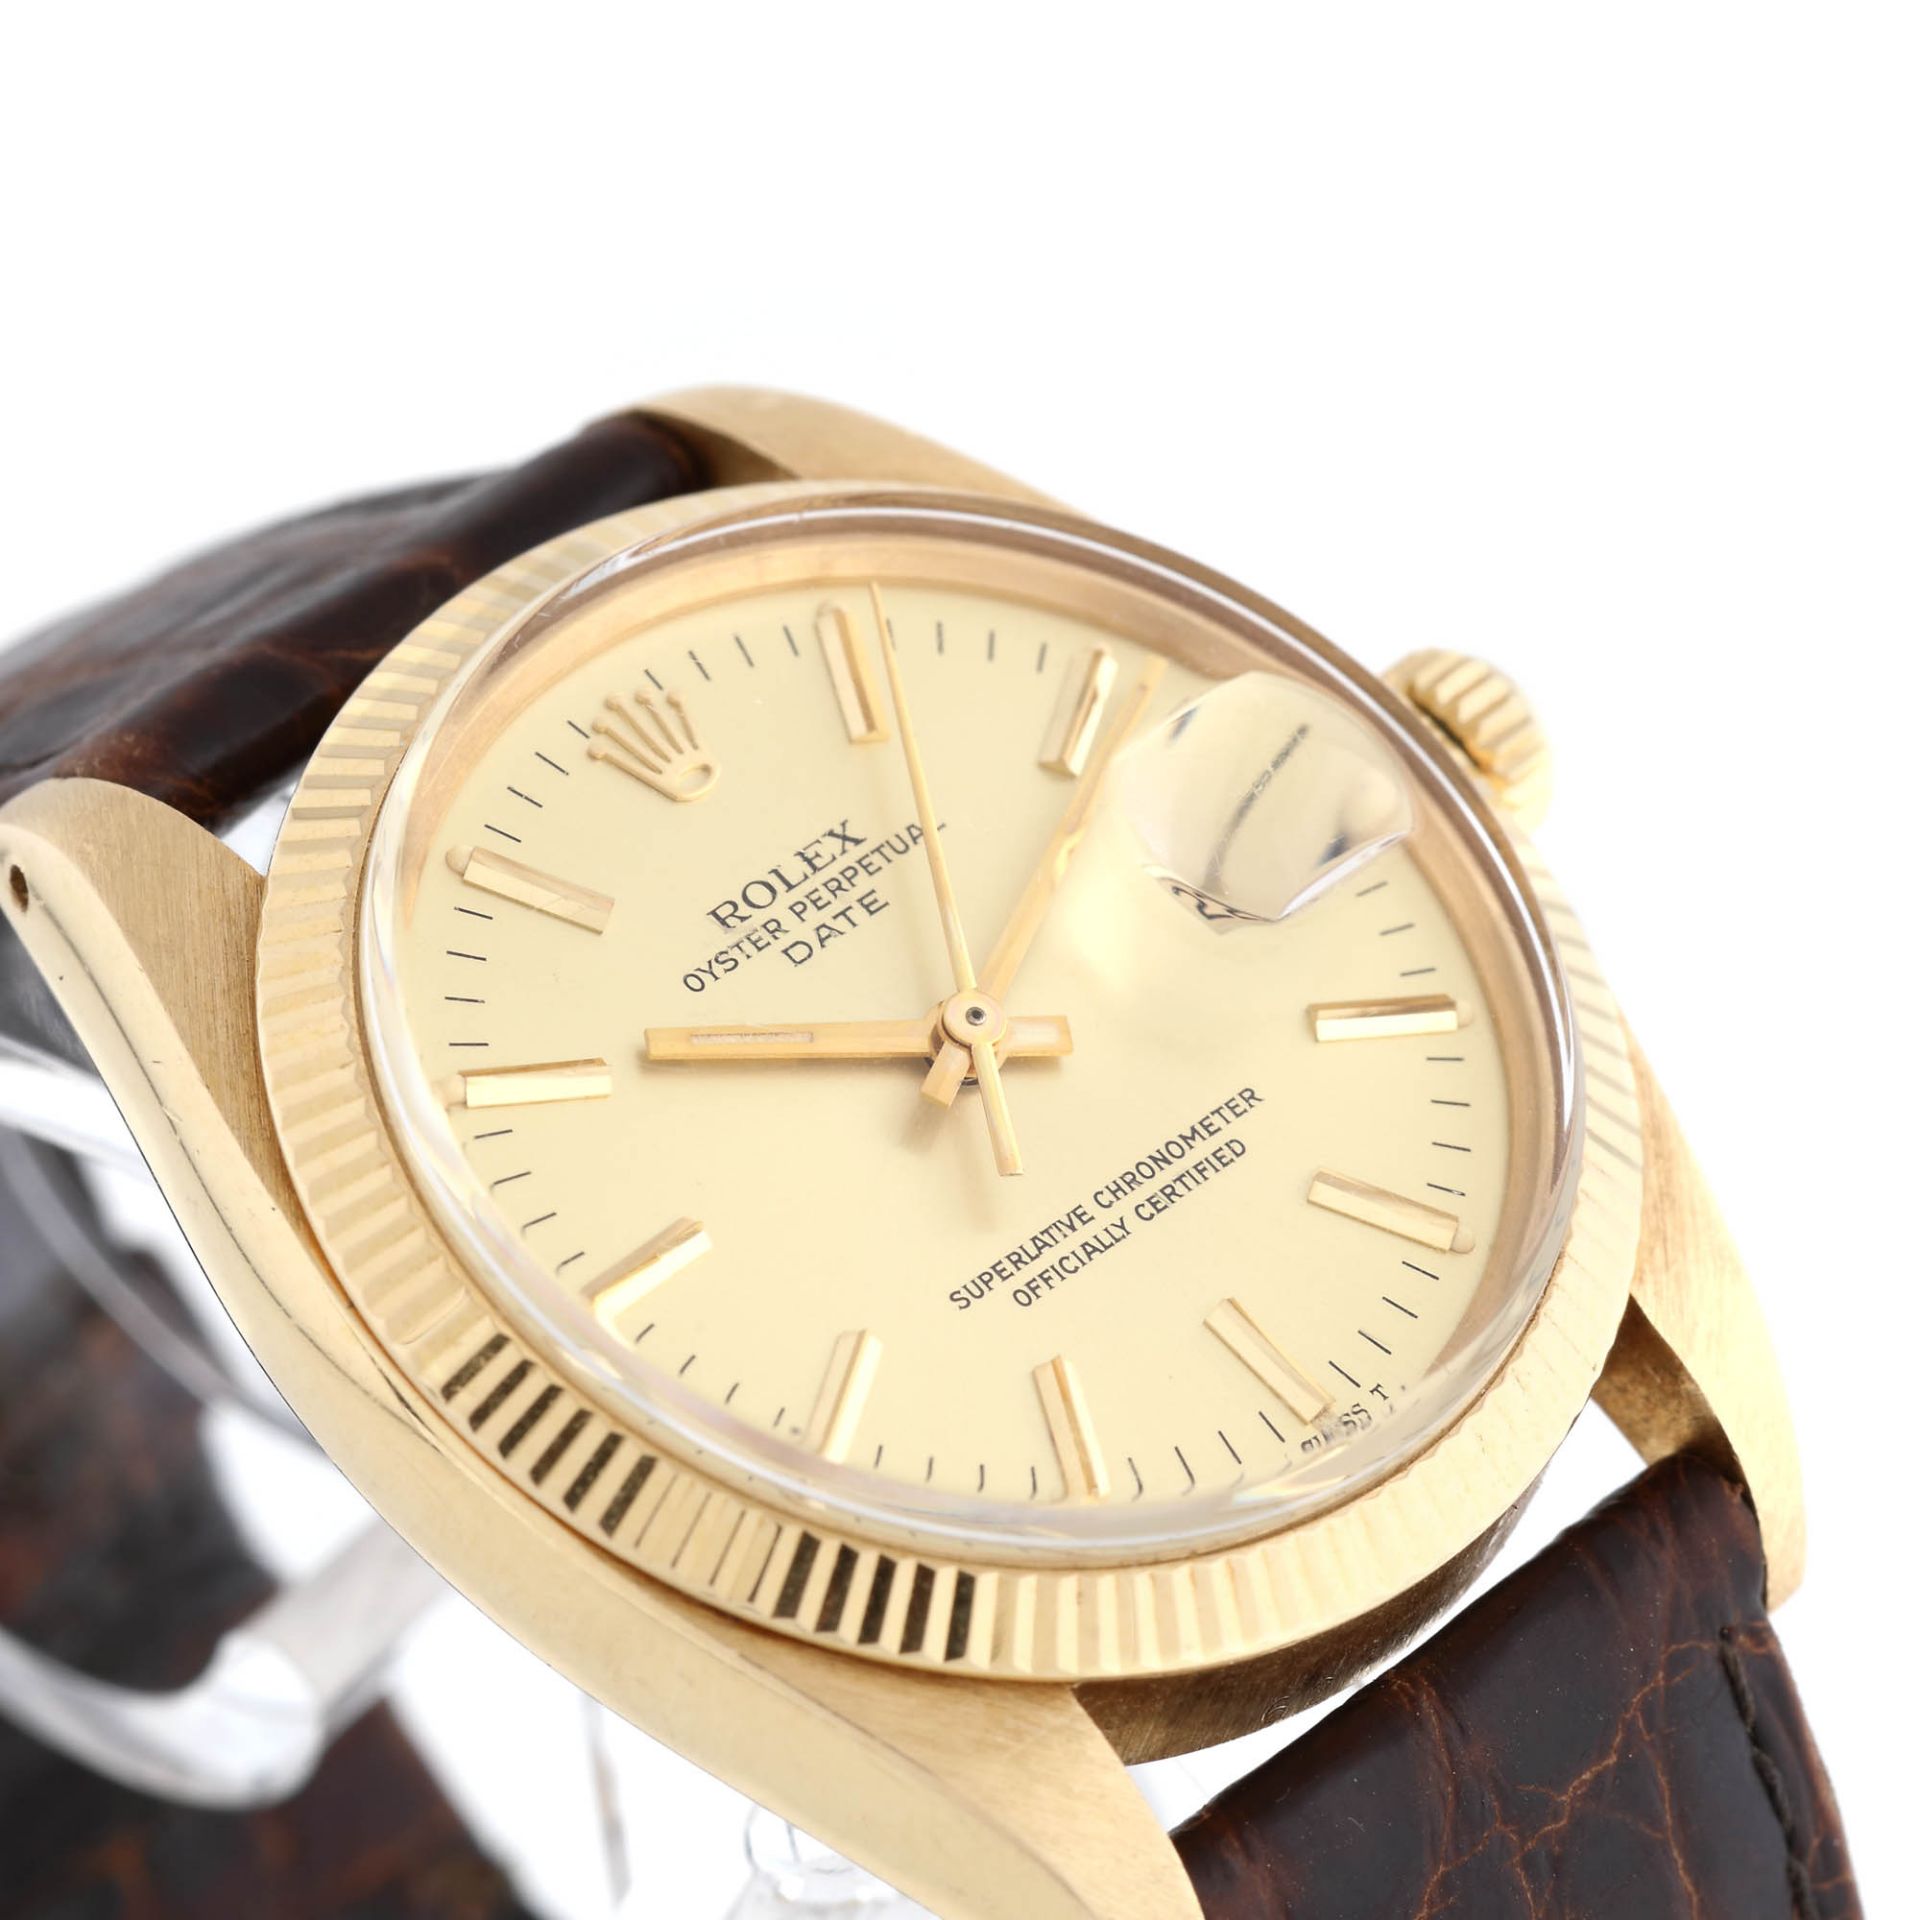 Rolex Oyster Perpetual Date wristwatch, gold, unisexRolex Oyster Perpetual Date wristwatch, gol - Image 2 of 3